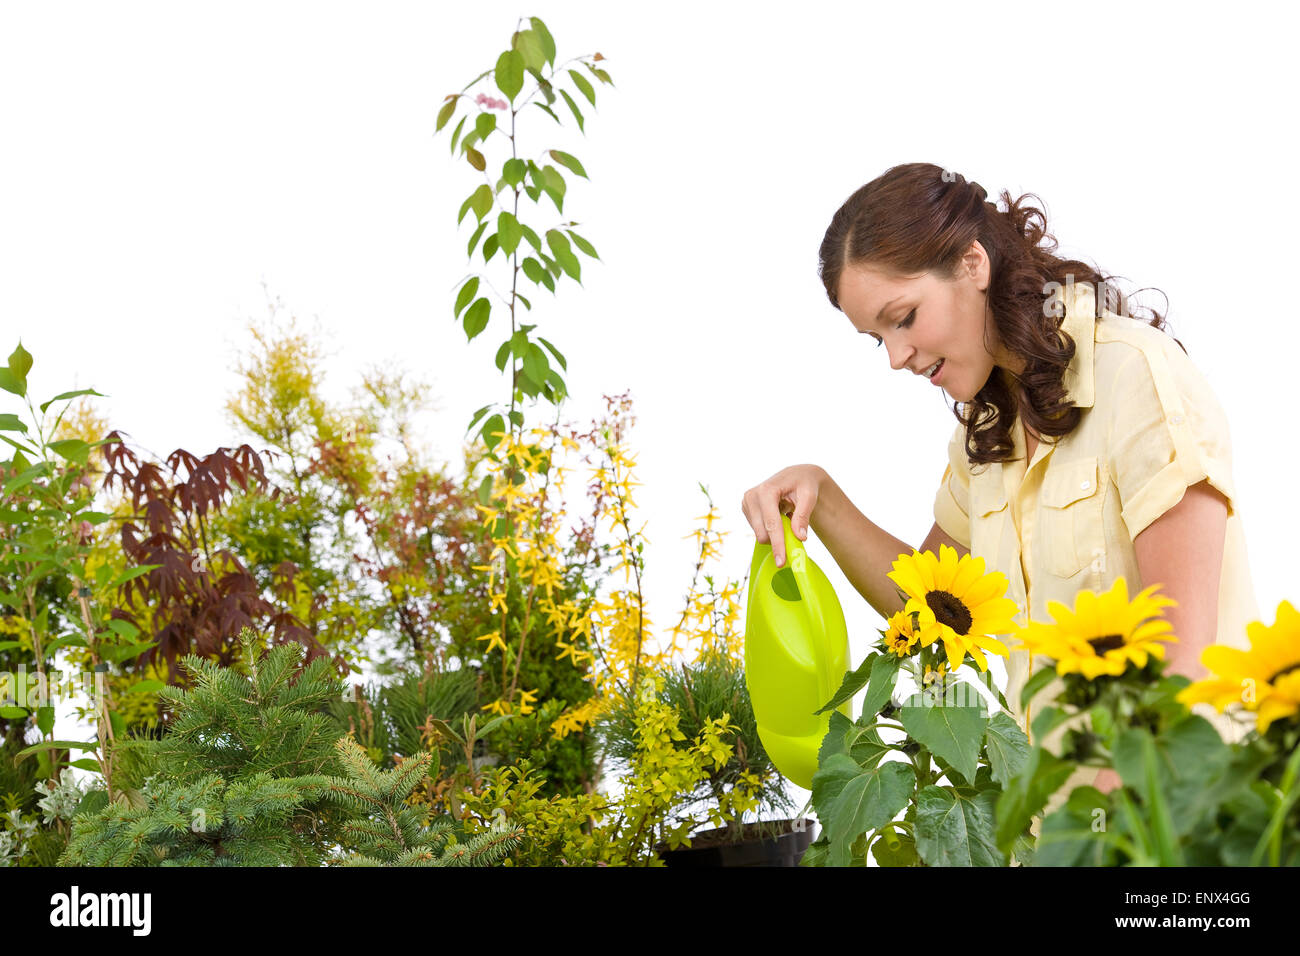 Gardening - Woman pouring plants with watering can Stock Photo